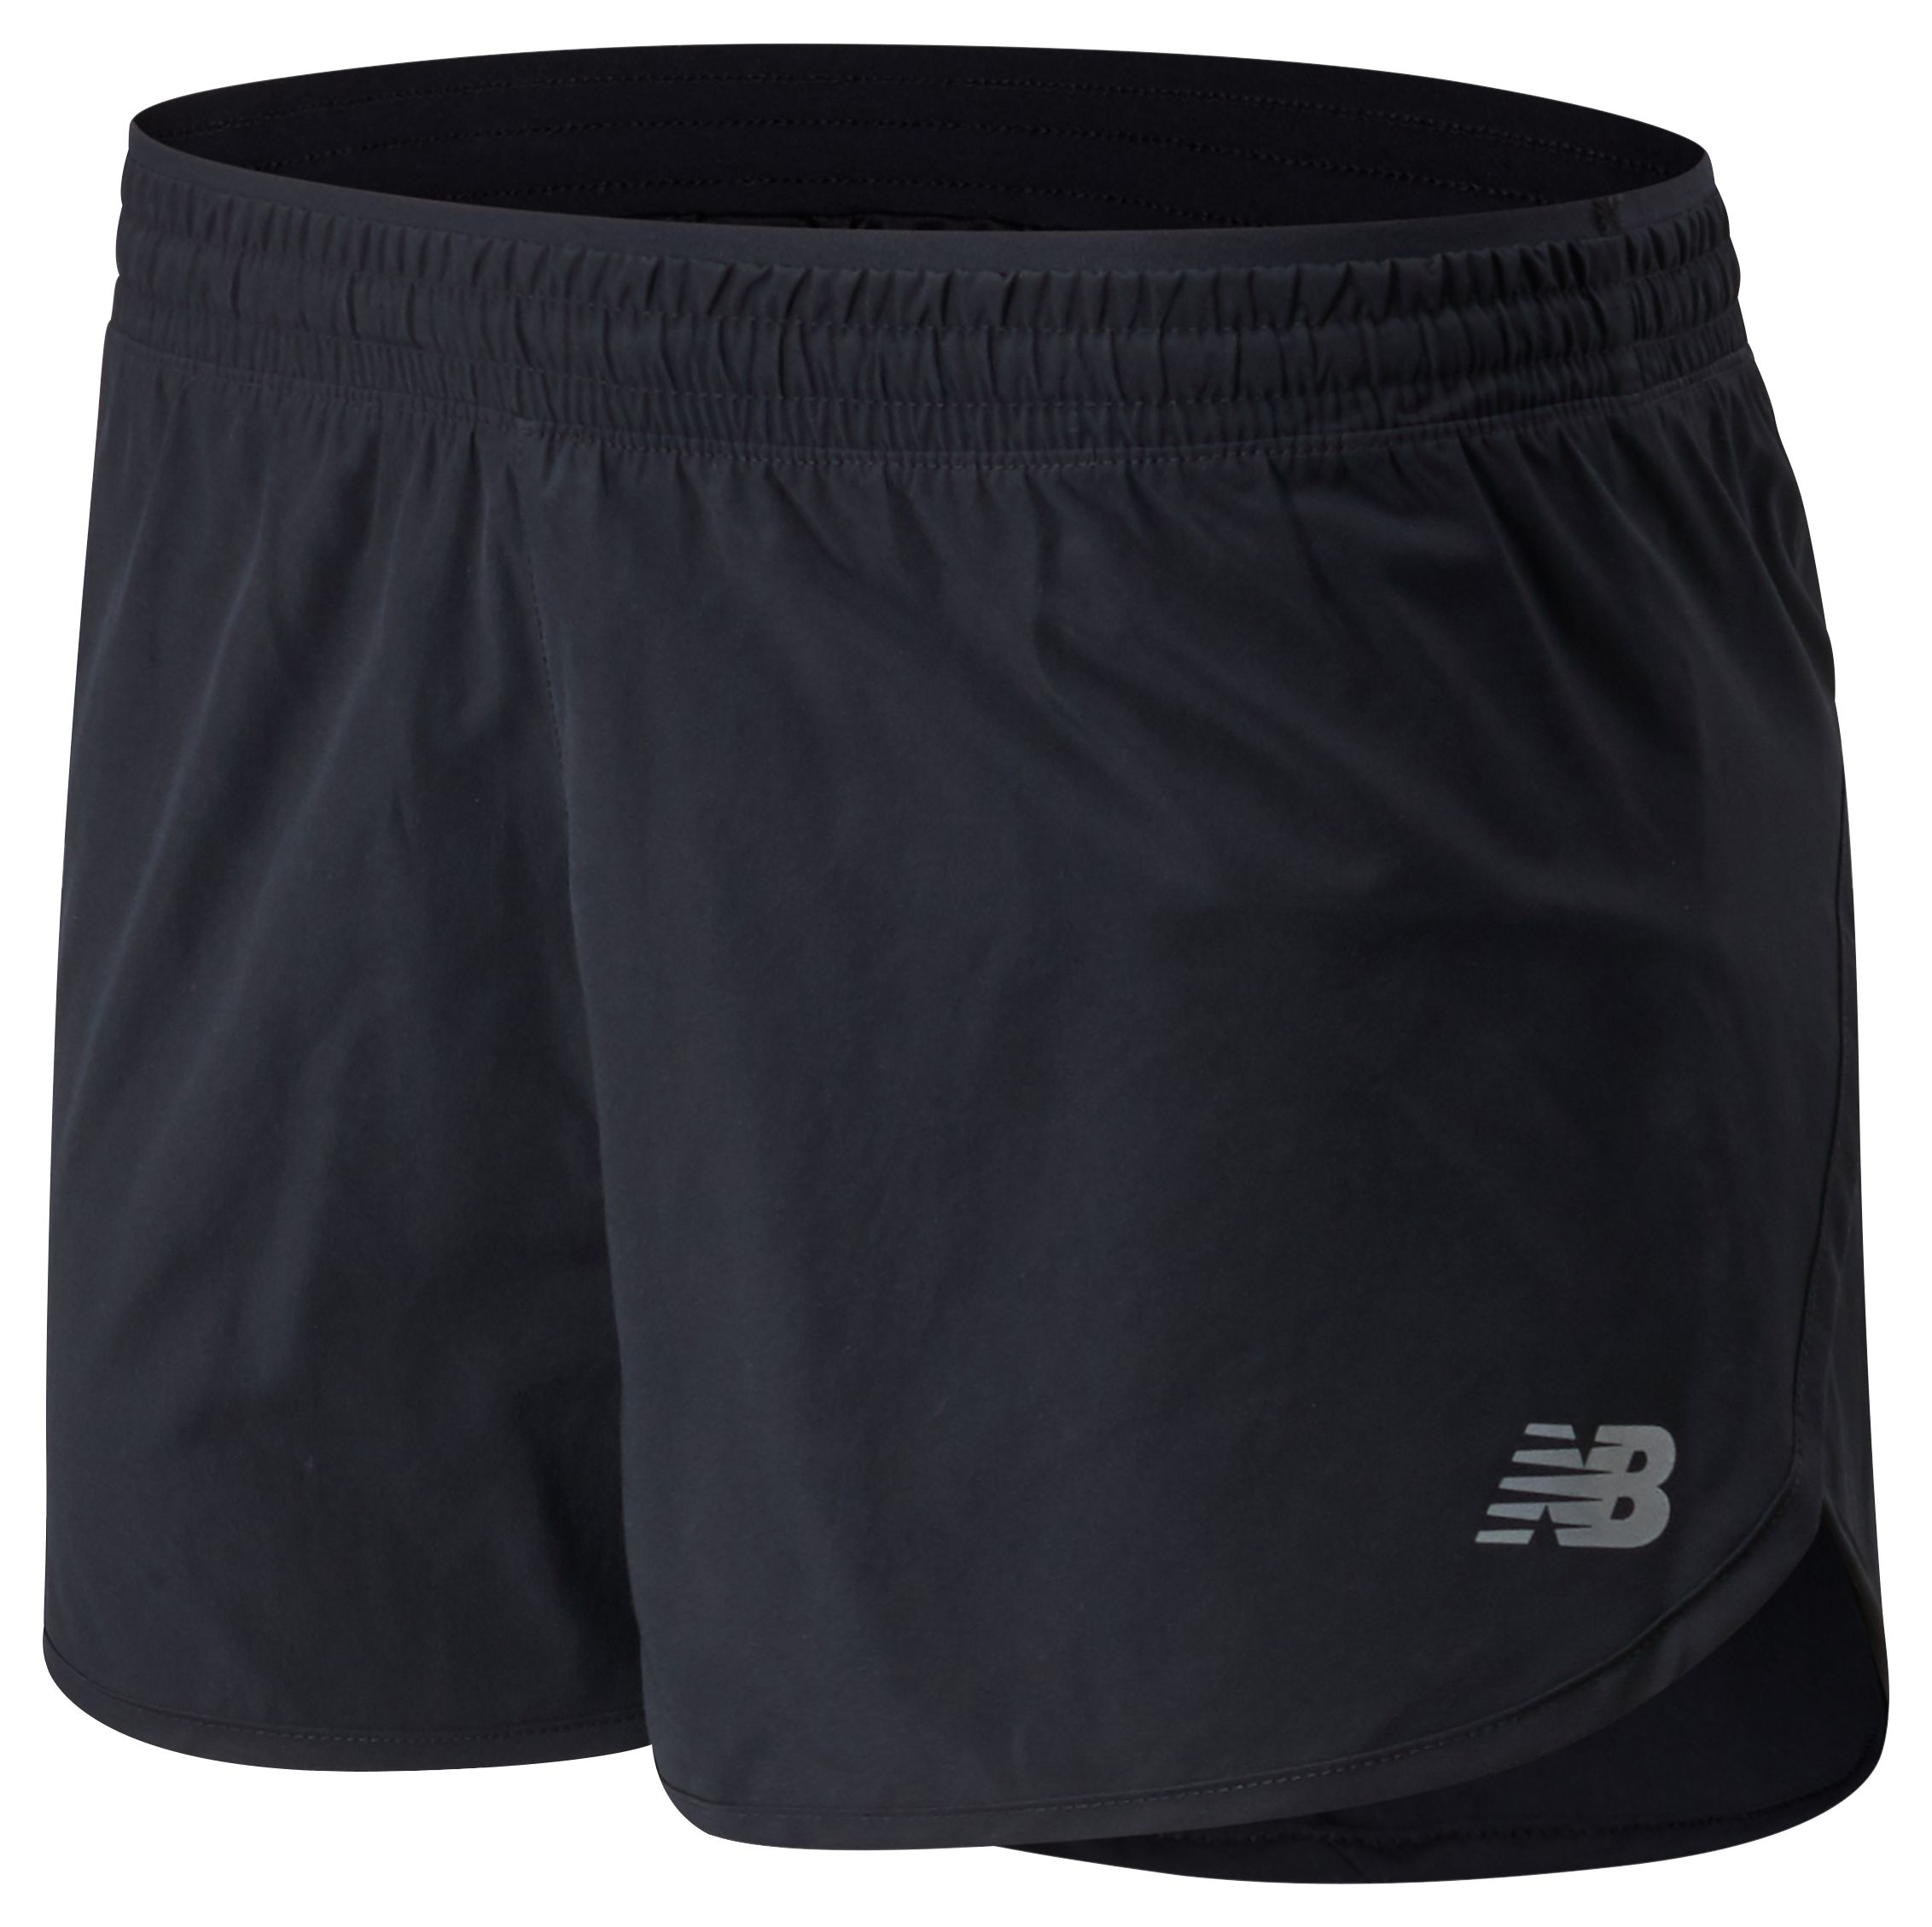 new balance challenge short review